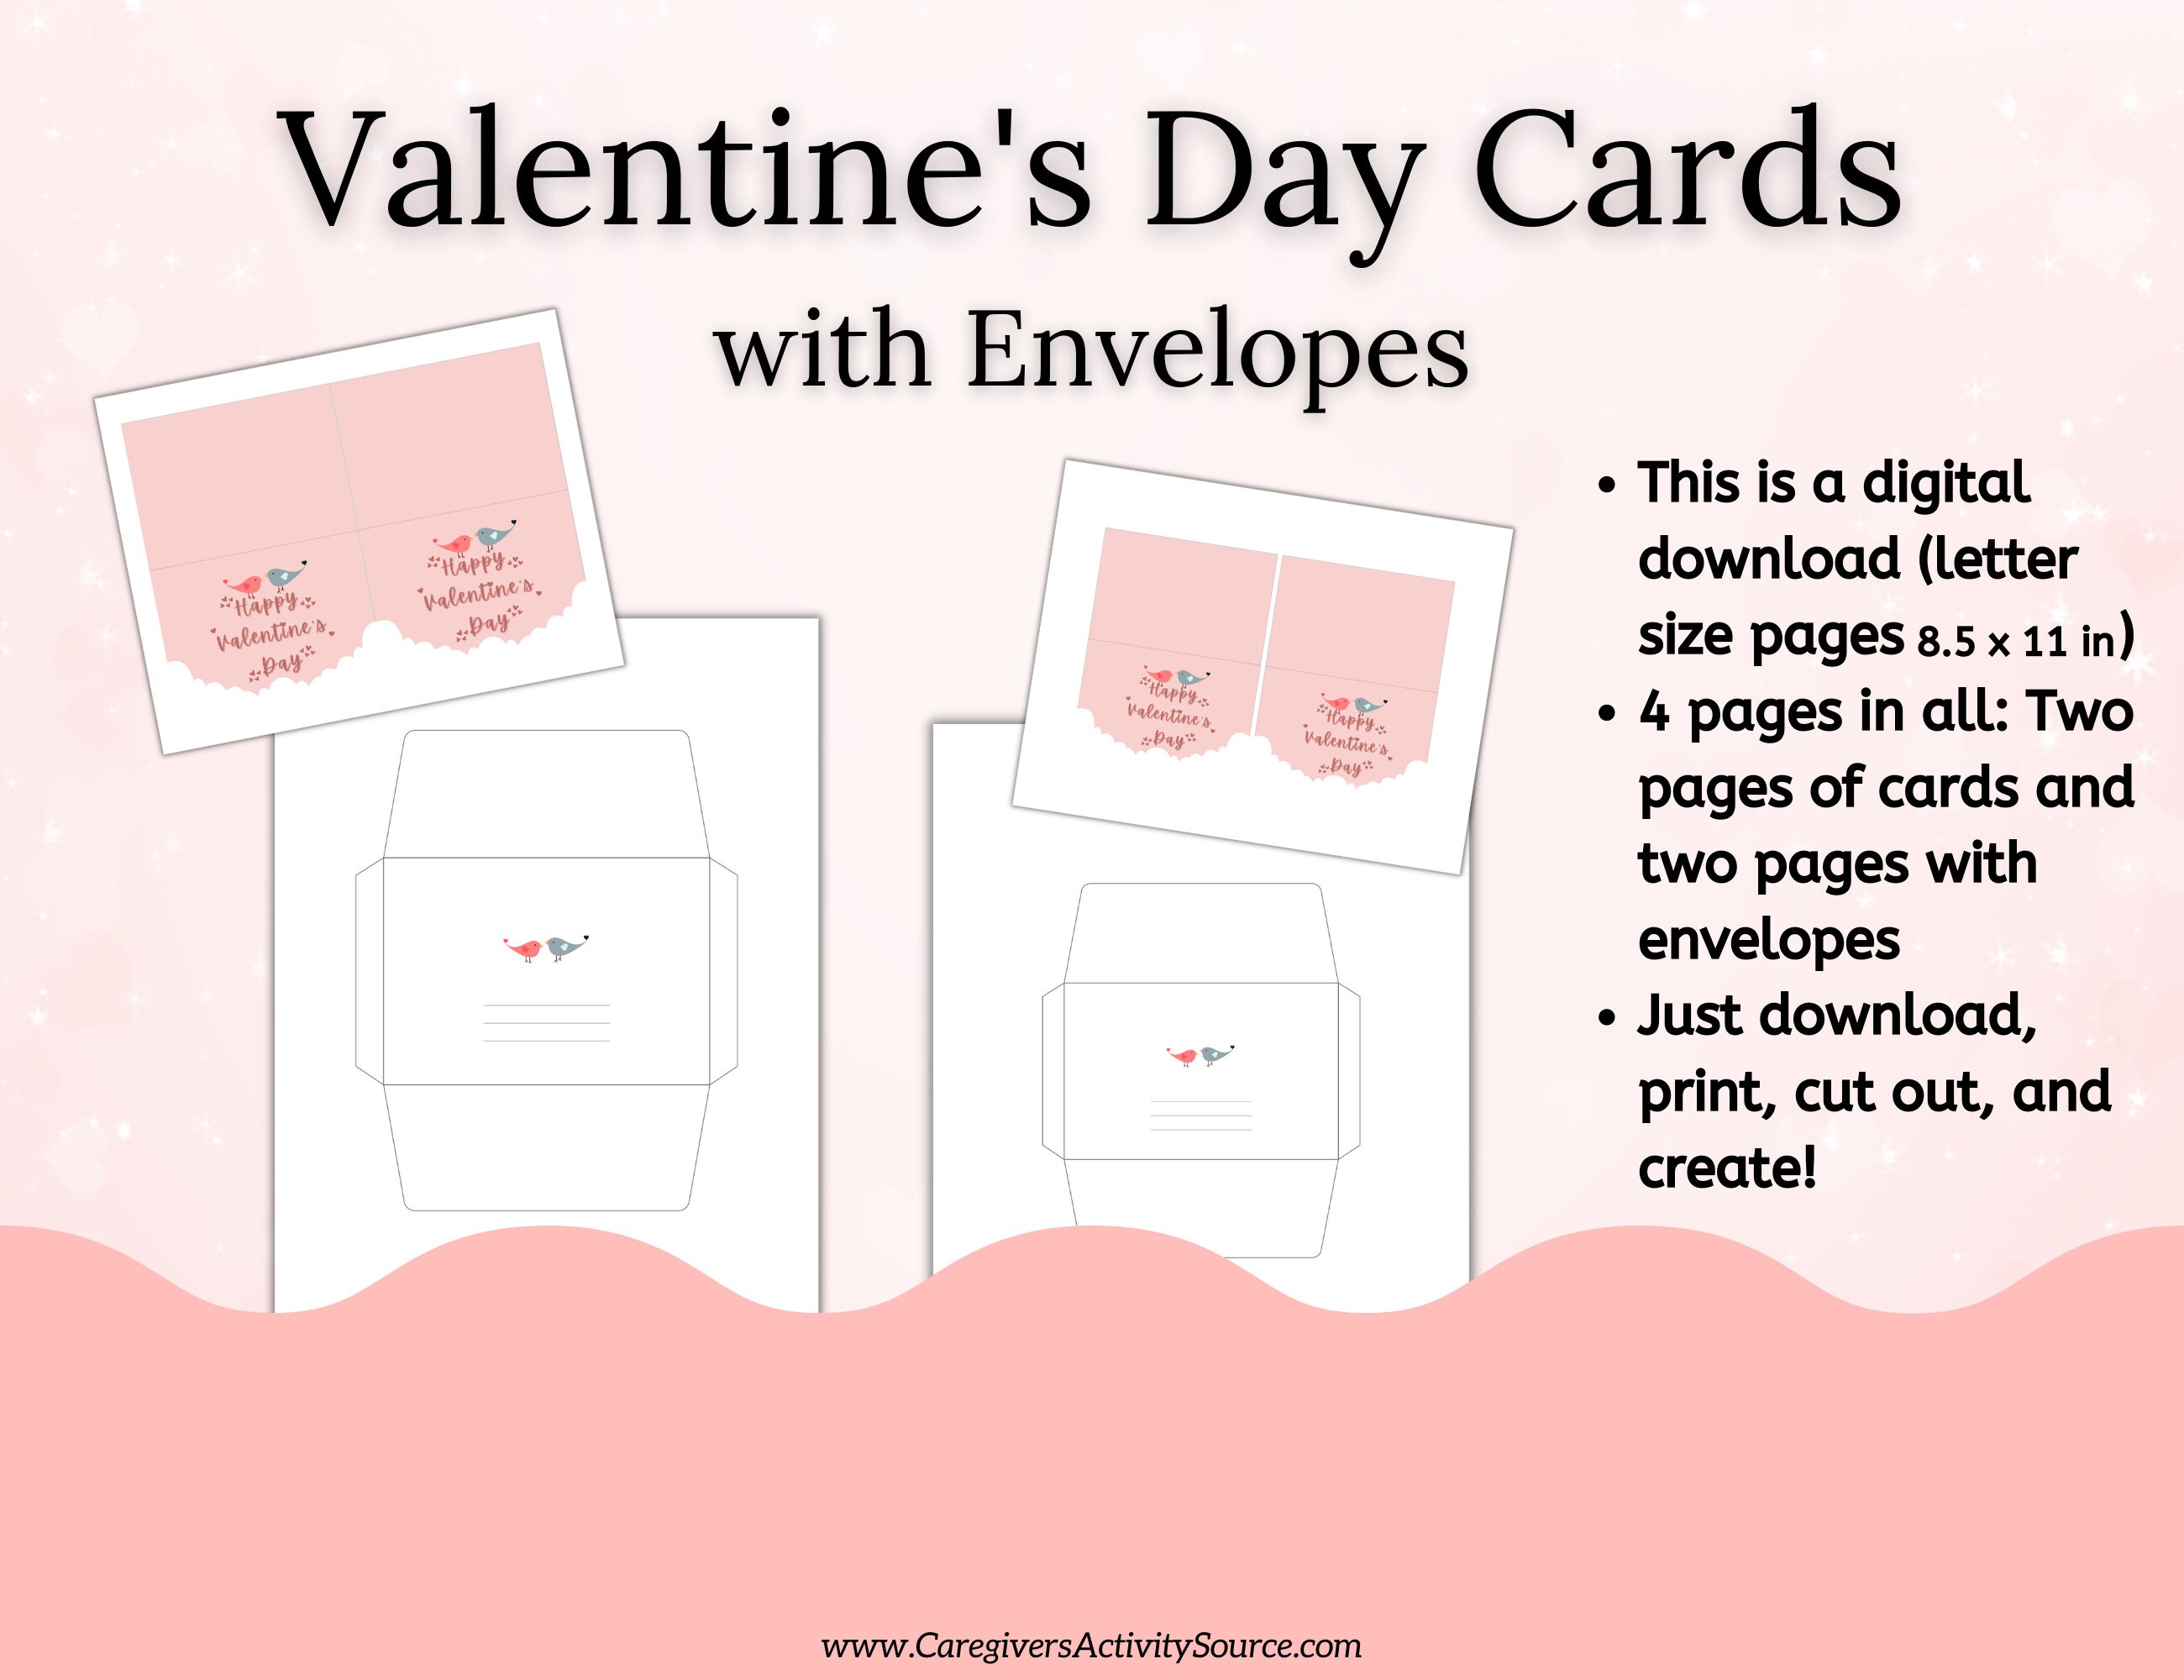 Printable Valentines Day Cards from Parent to Child - Meet Penny   Printable valentines day cards, Happy valentines day son, Valentine day  cards